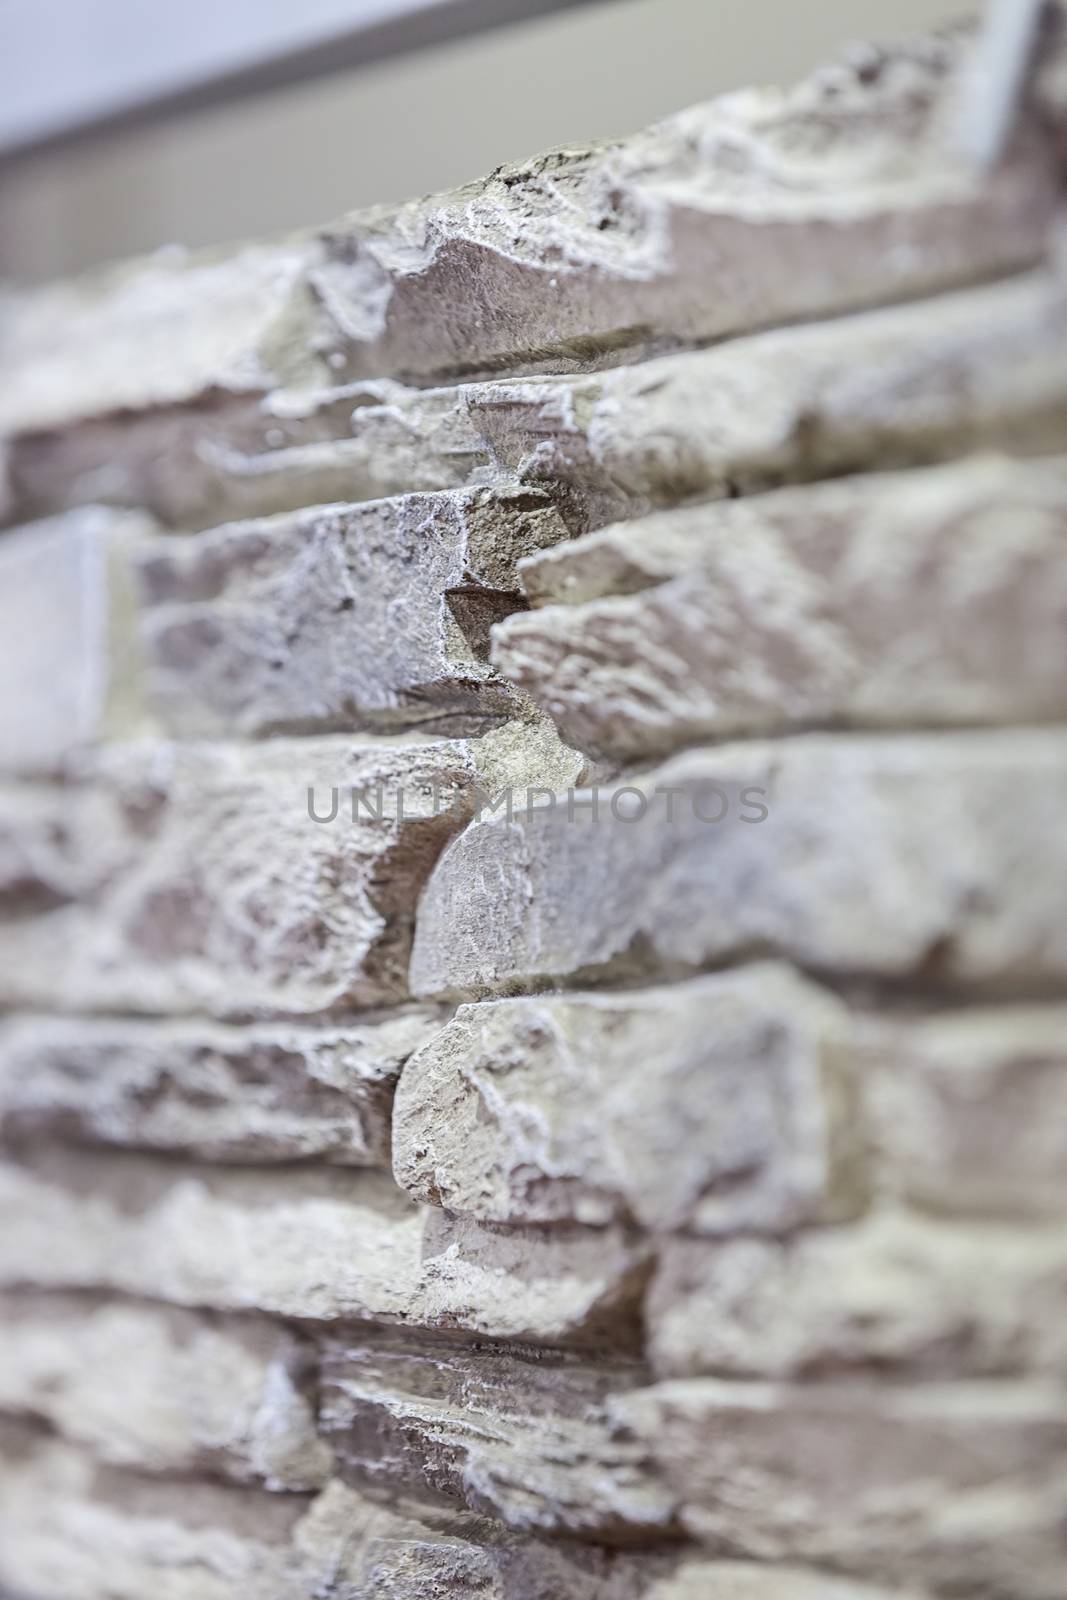 a part of new stone wall, note shallow depth of field